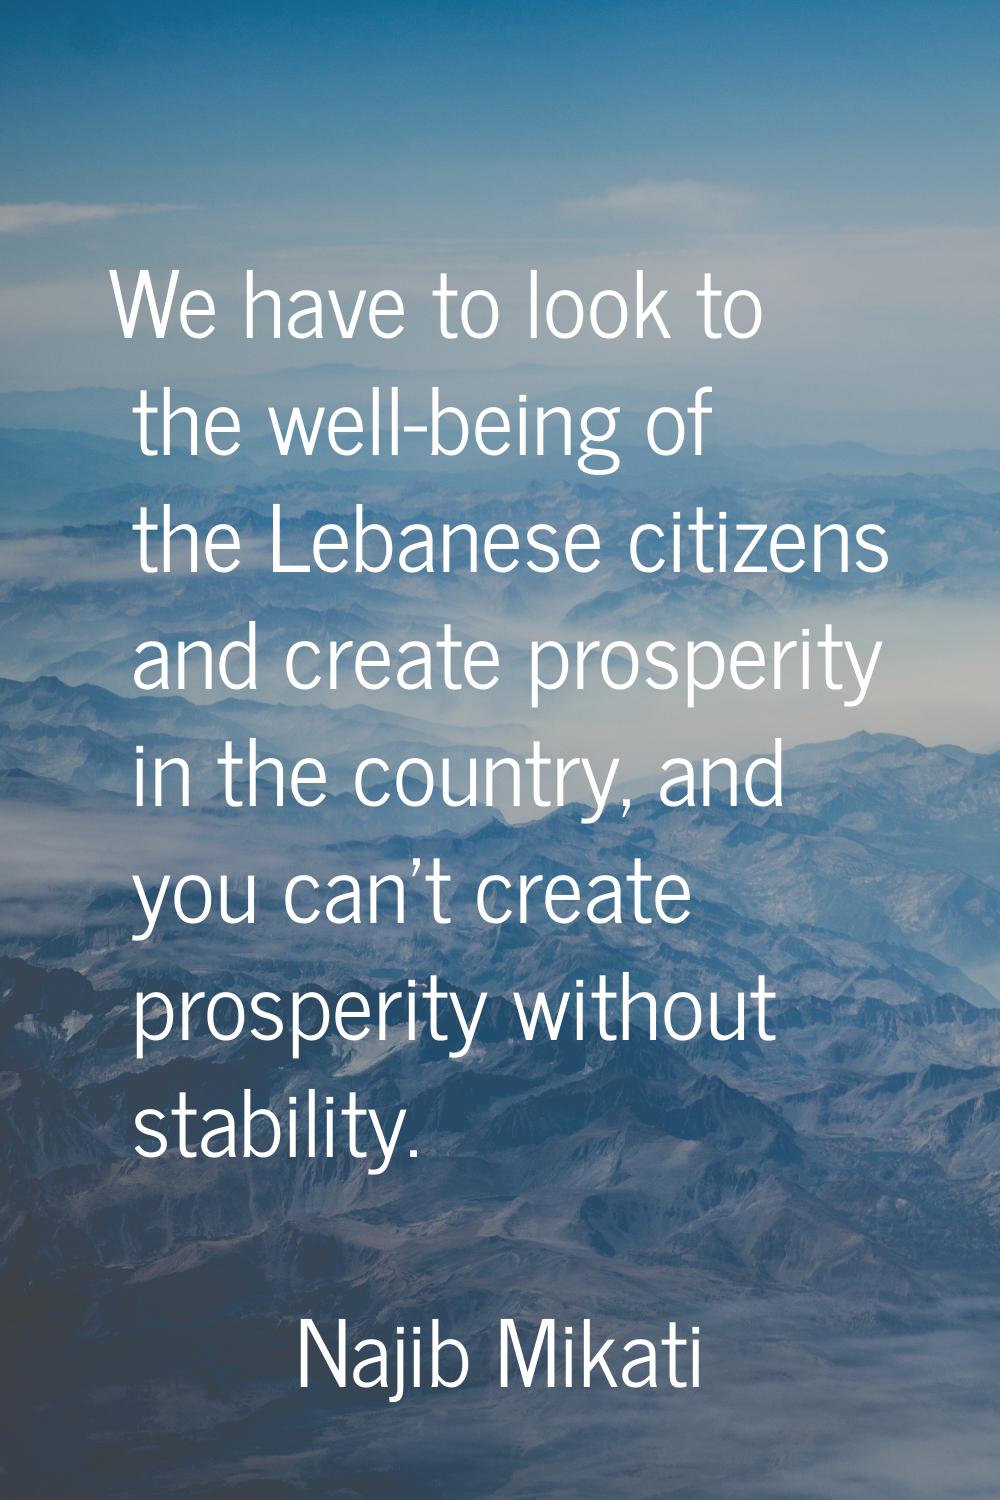 We have to look to the well-being of the Lebanese citizens and create prosperity in the country, an